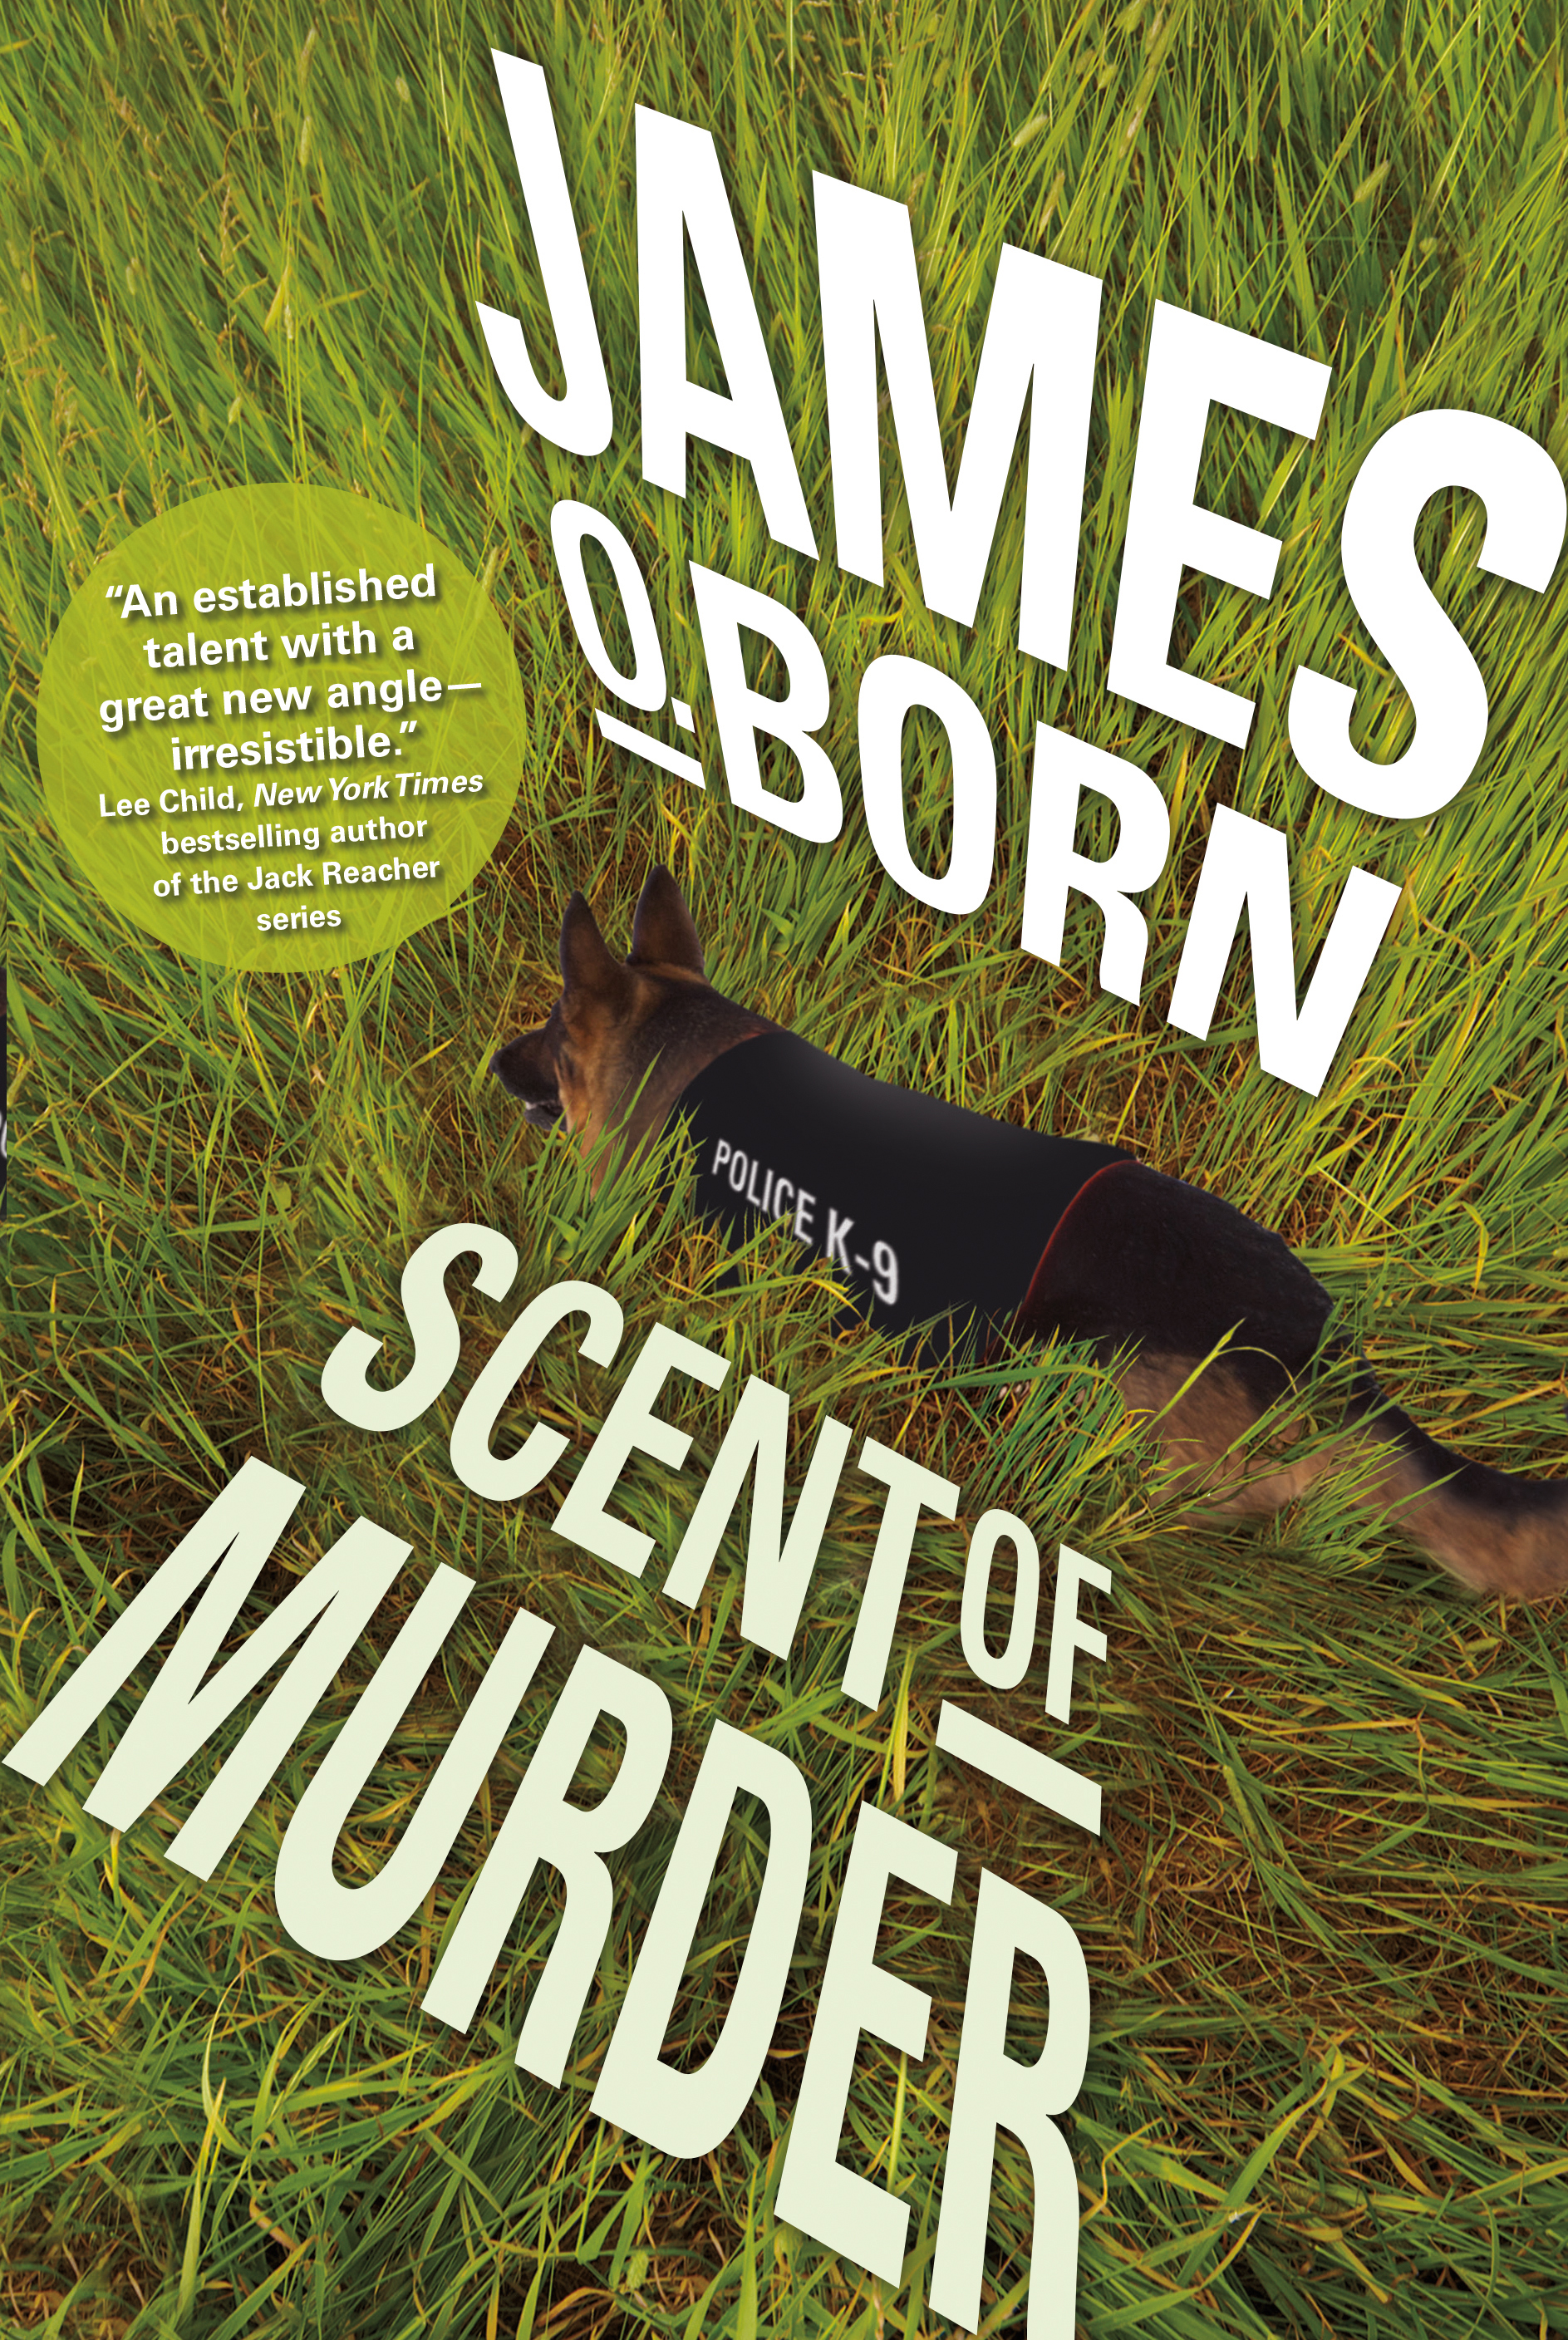 Scent of Murder : A Novel by James O. Born